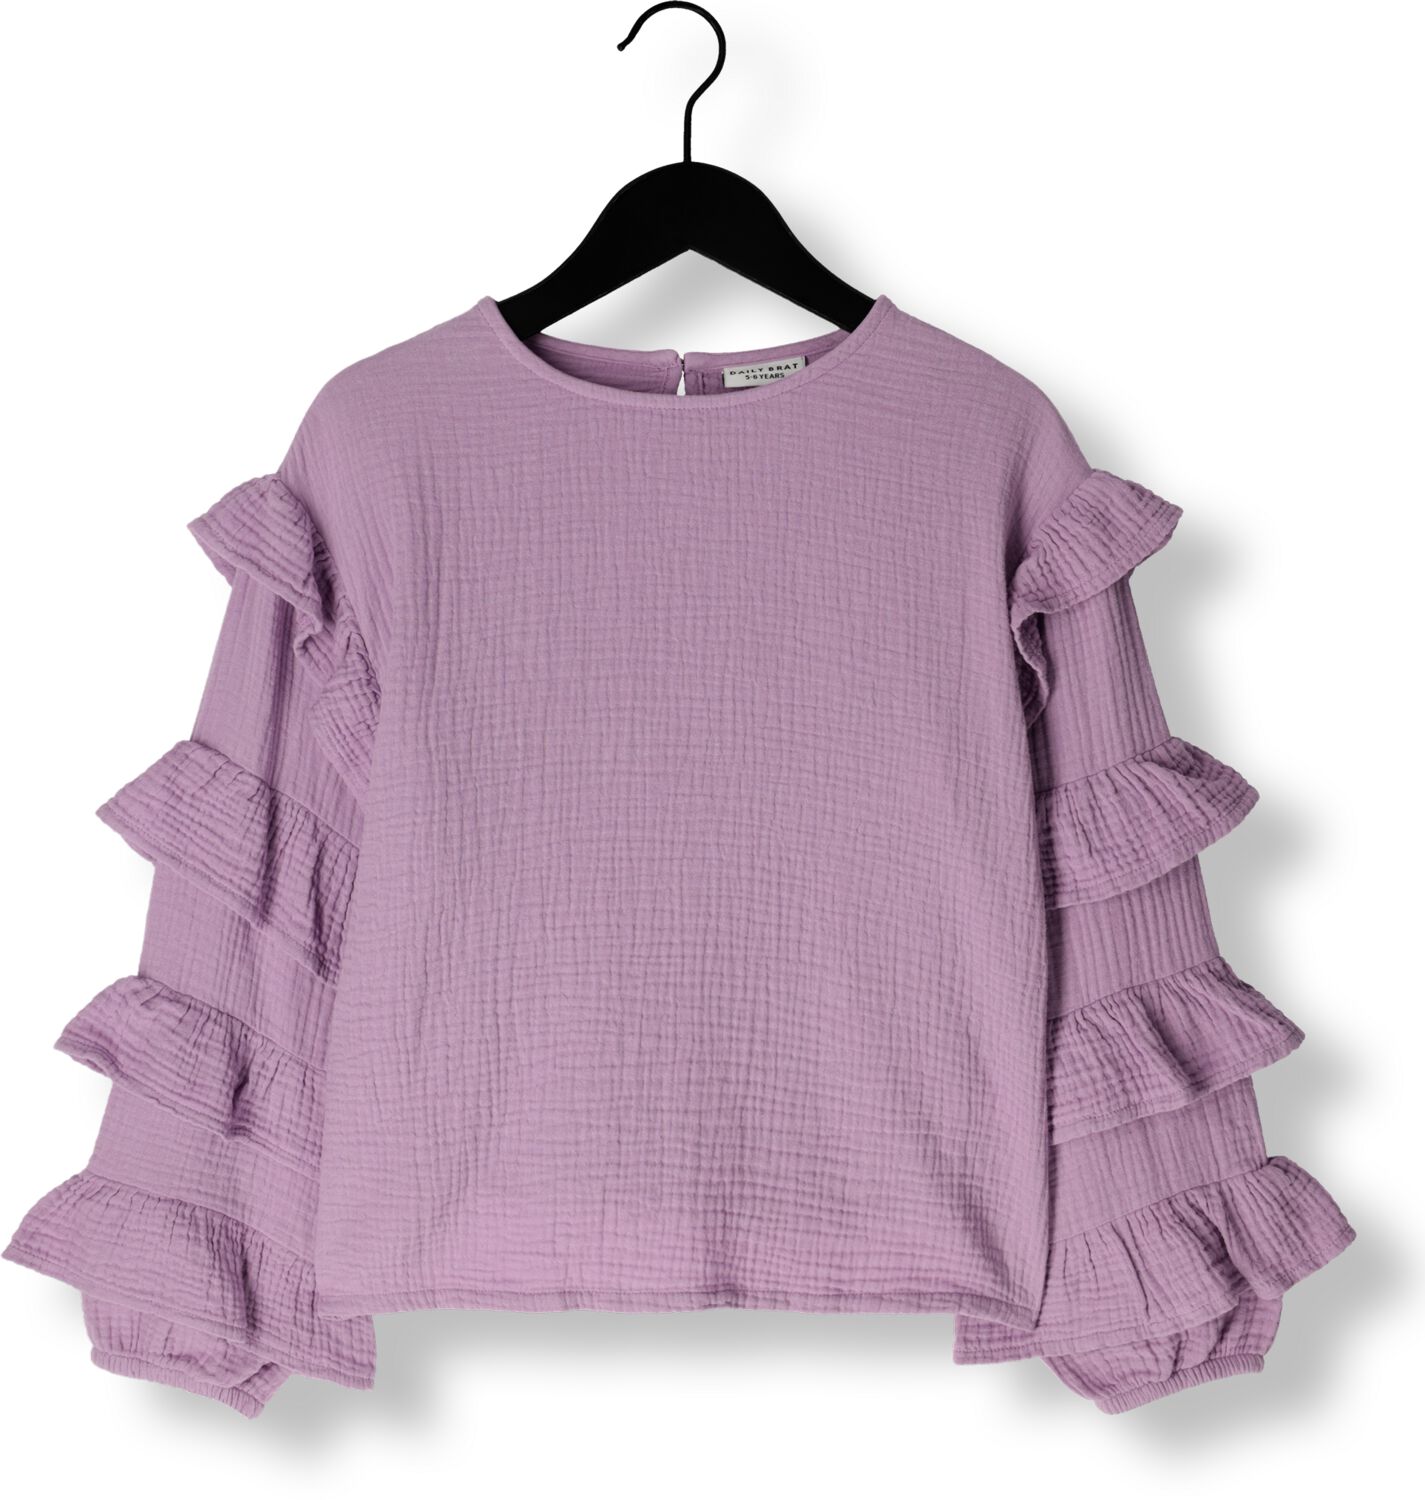 DAILY BRAT Meisjes Tops & T-shirts Lolly Pop Ruffle Top Paars